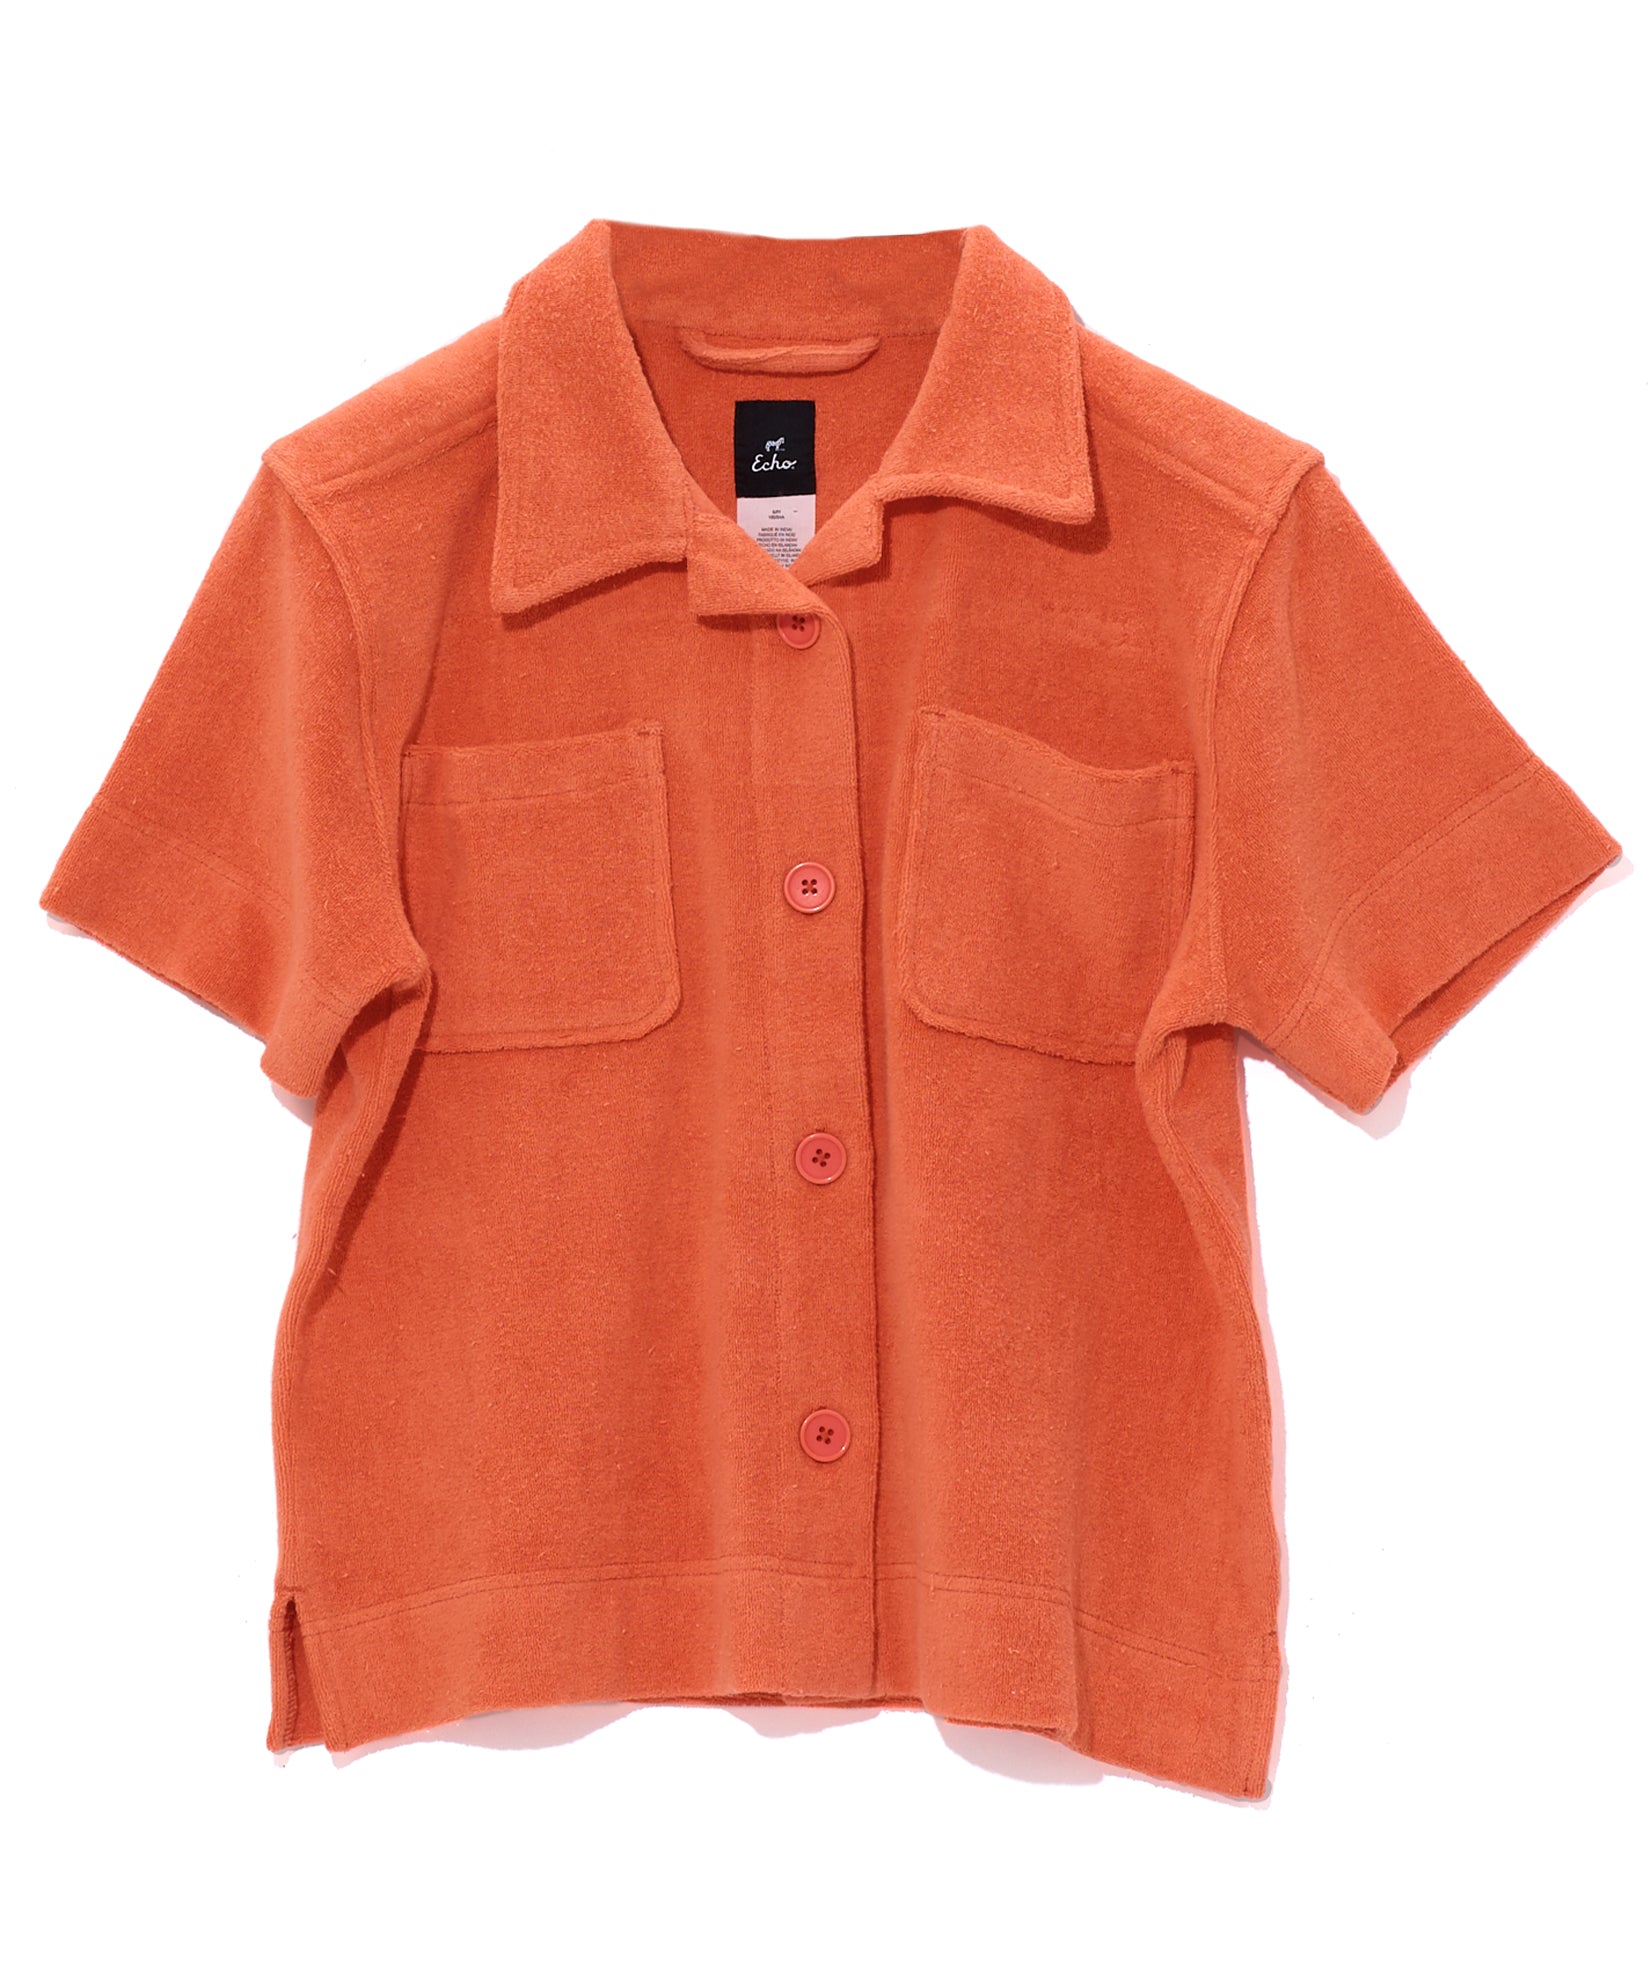 Terry Camp Shirt in color Tangerine